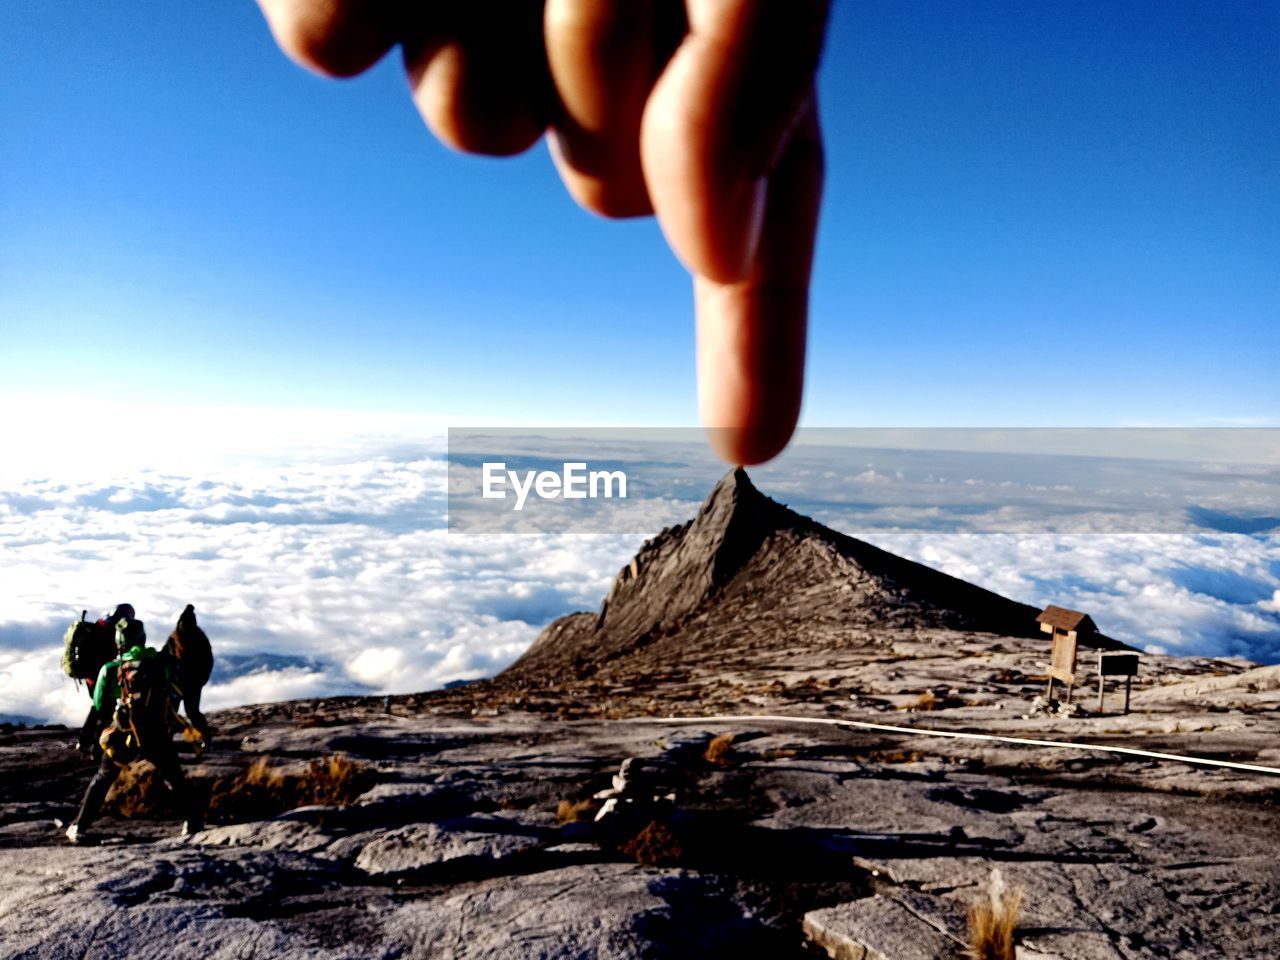 CROPPED IMAGE OF HAND AGAINST MOUNTAIN RANGE